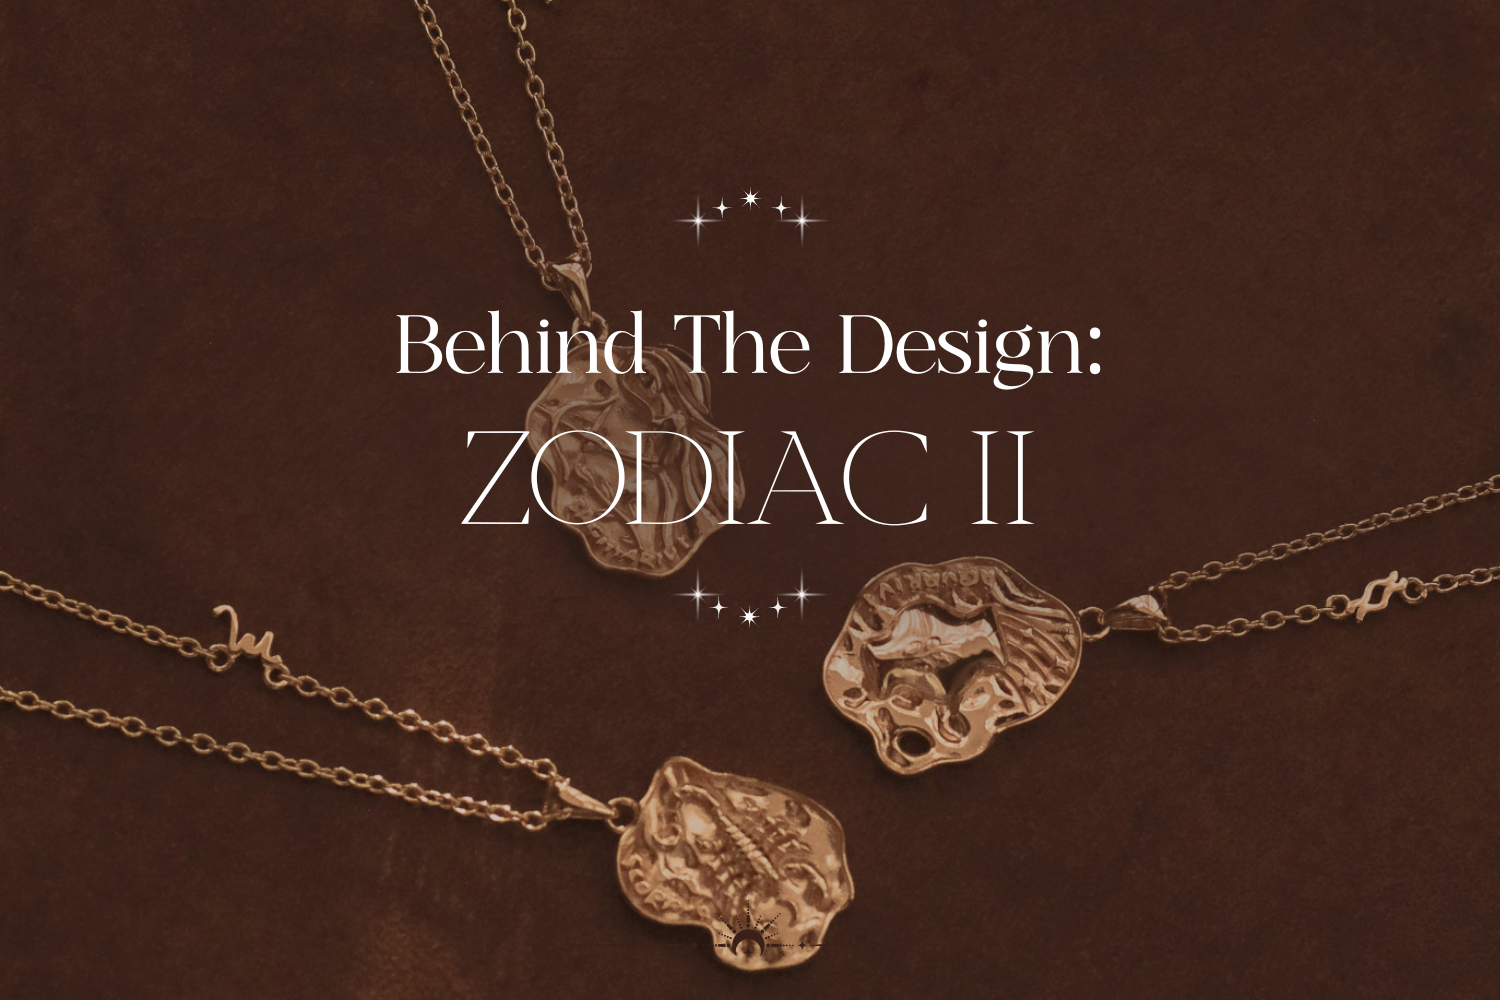 Behind the Design: Zodiac II Collection